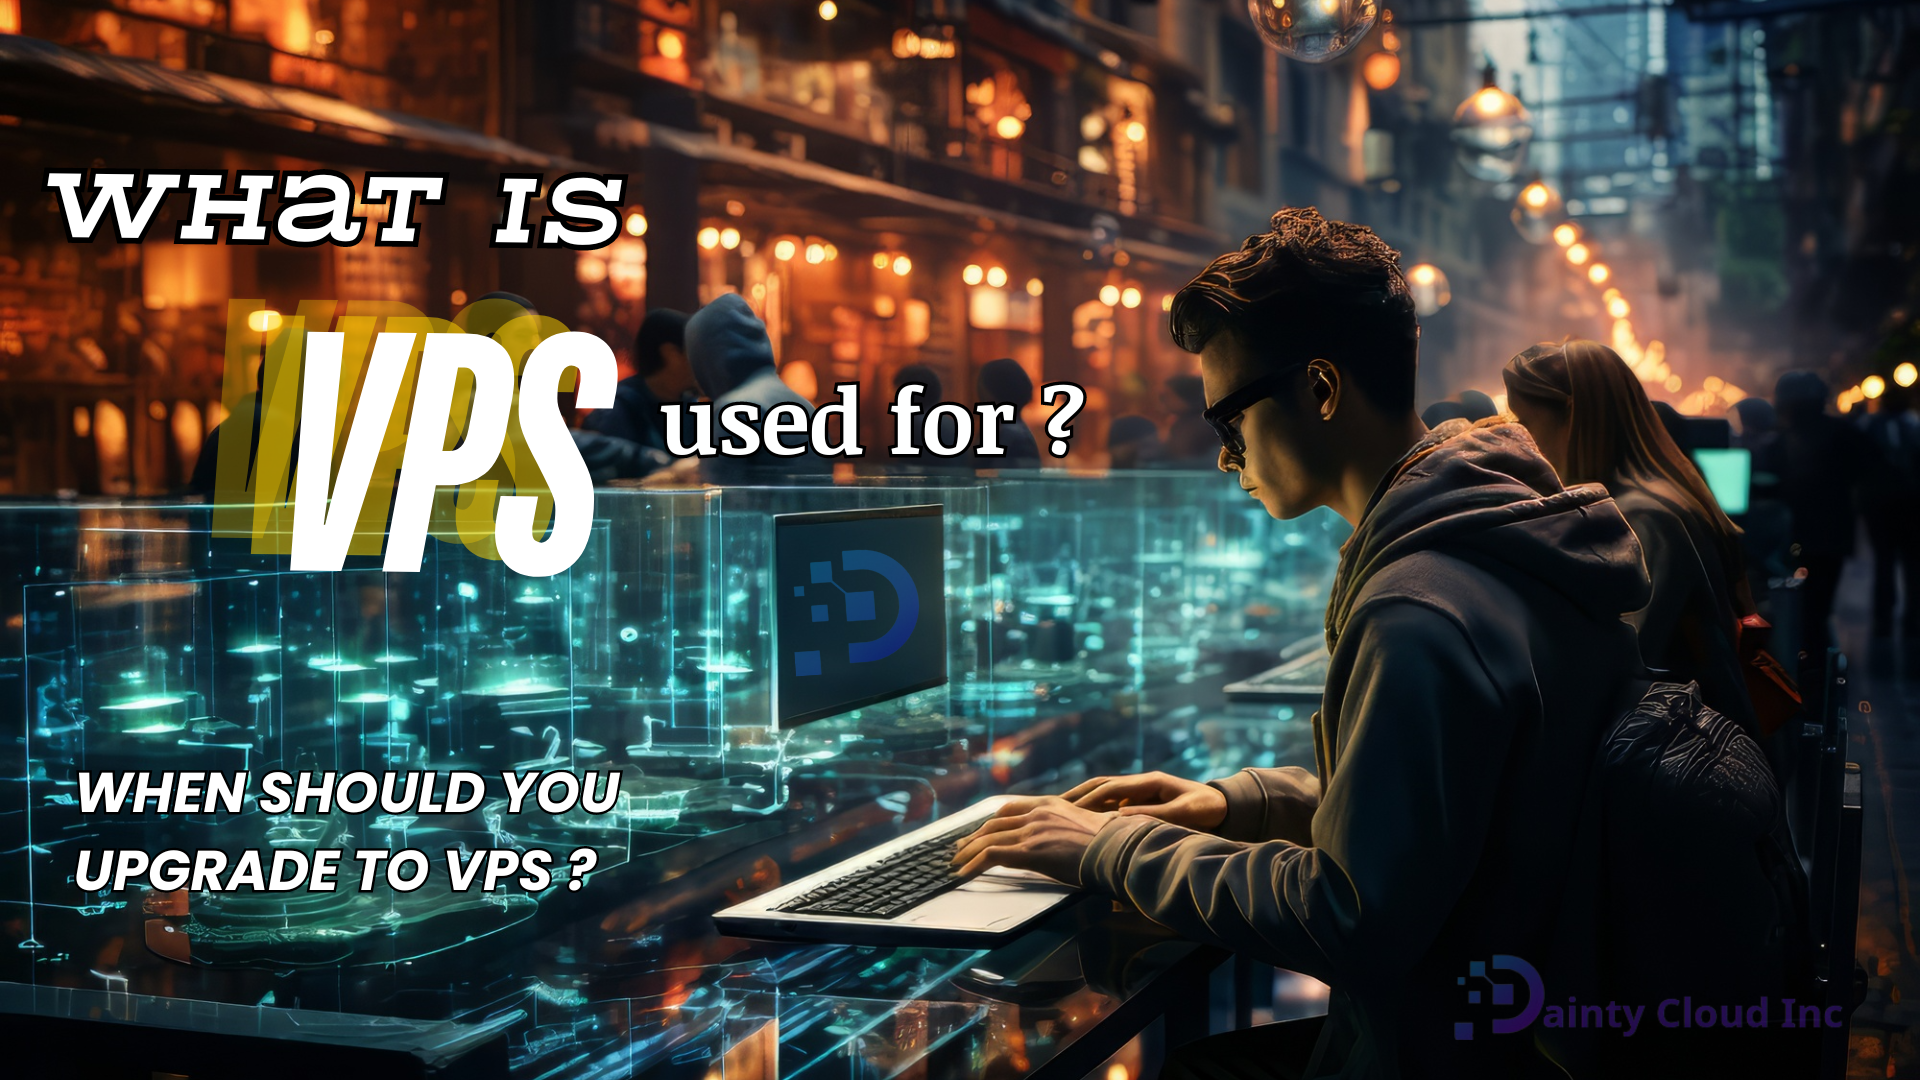 What is VPS? What is VPS used for? When should you upgrade to VPS?